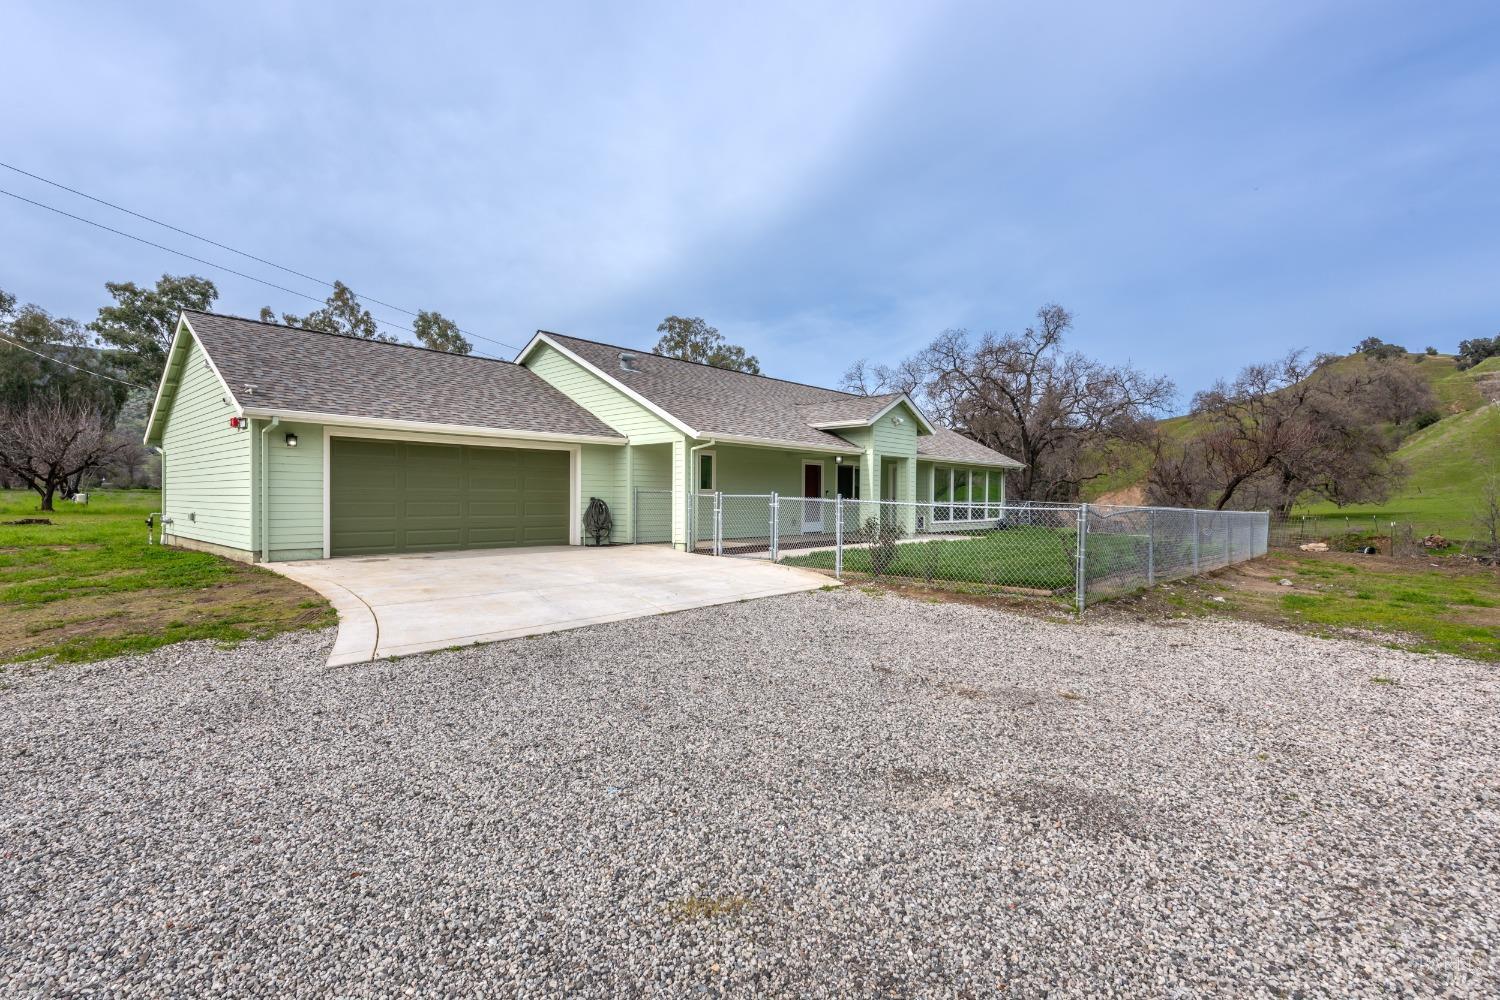 Photo of 8261 Pleasants Valley Rd in Vacaville, CA